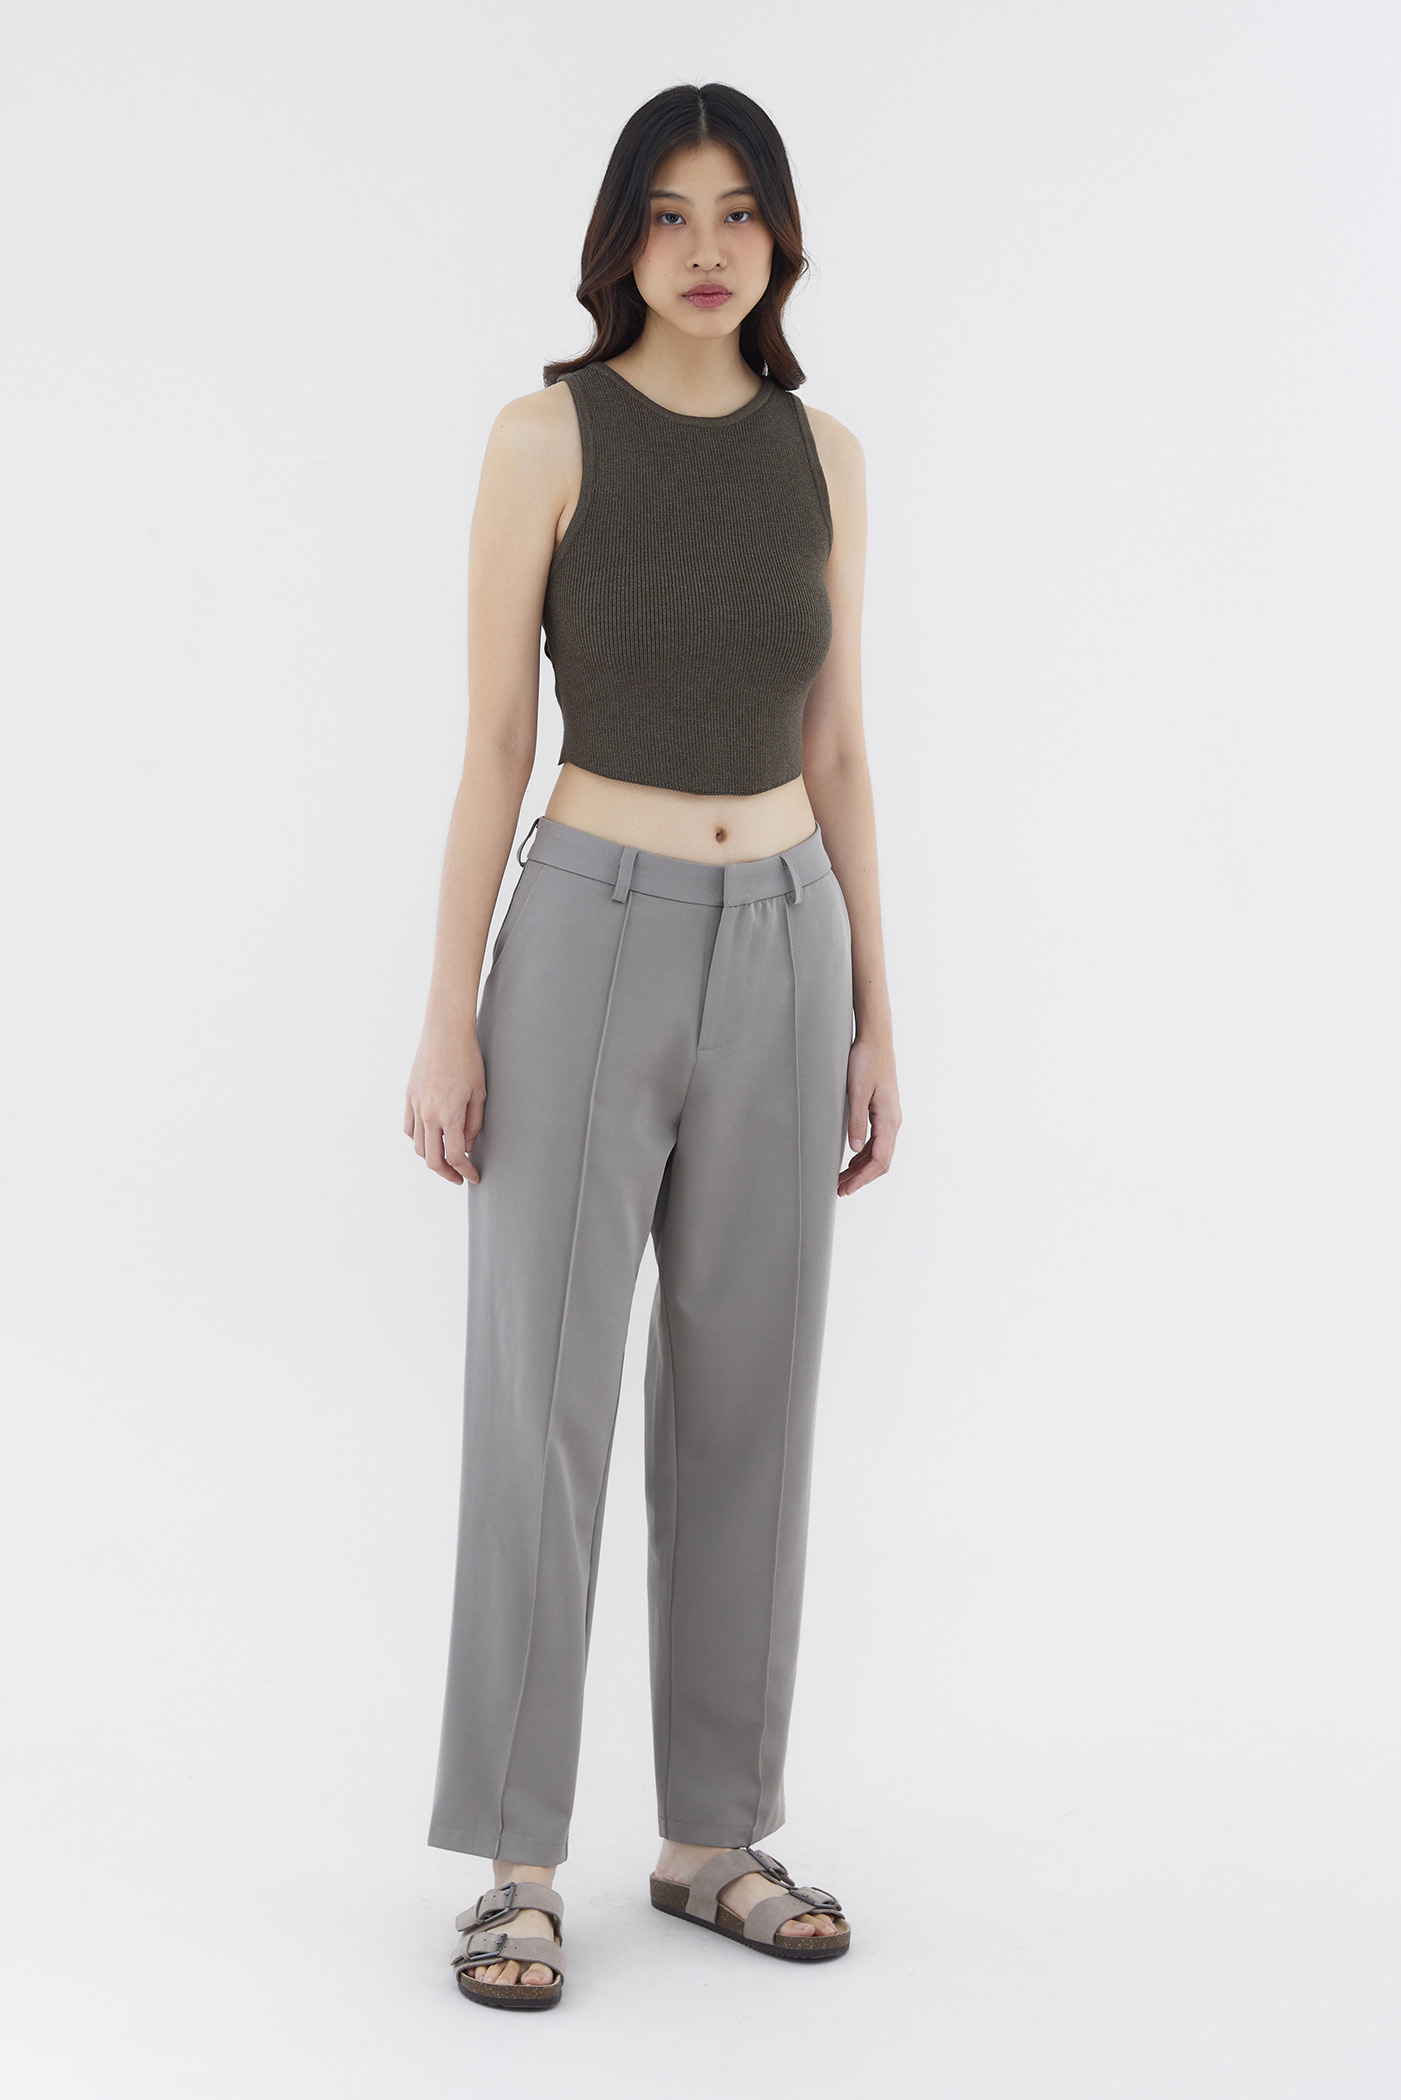 Buy STOP Solid Tailored Fit Women's Formal Wear Trouser | Shoppers Stop